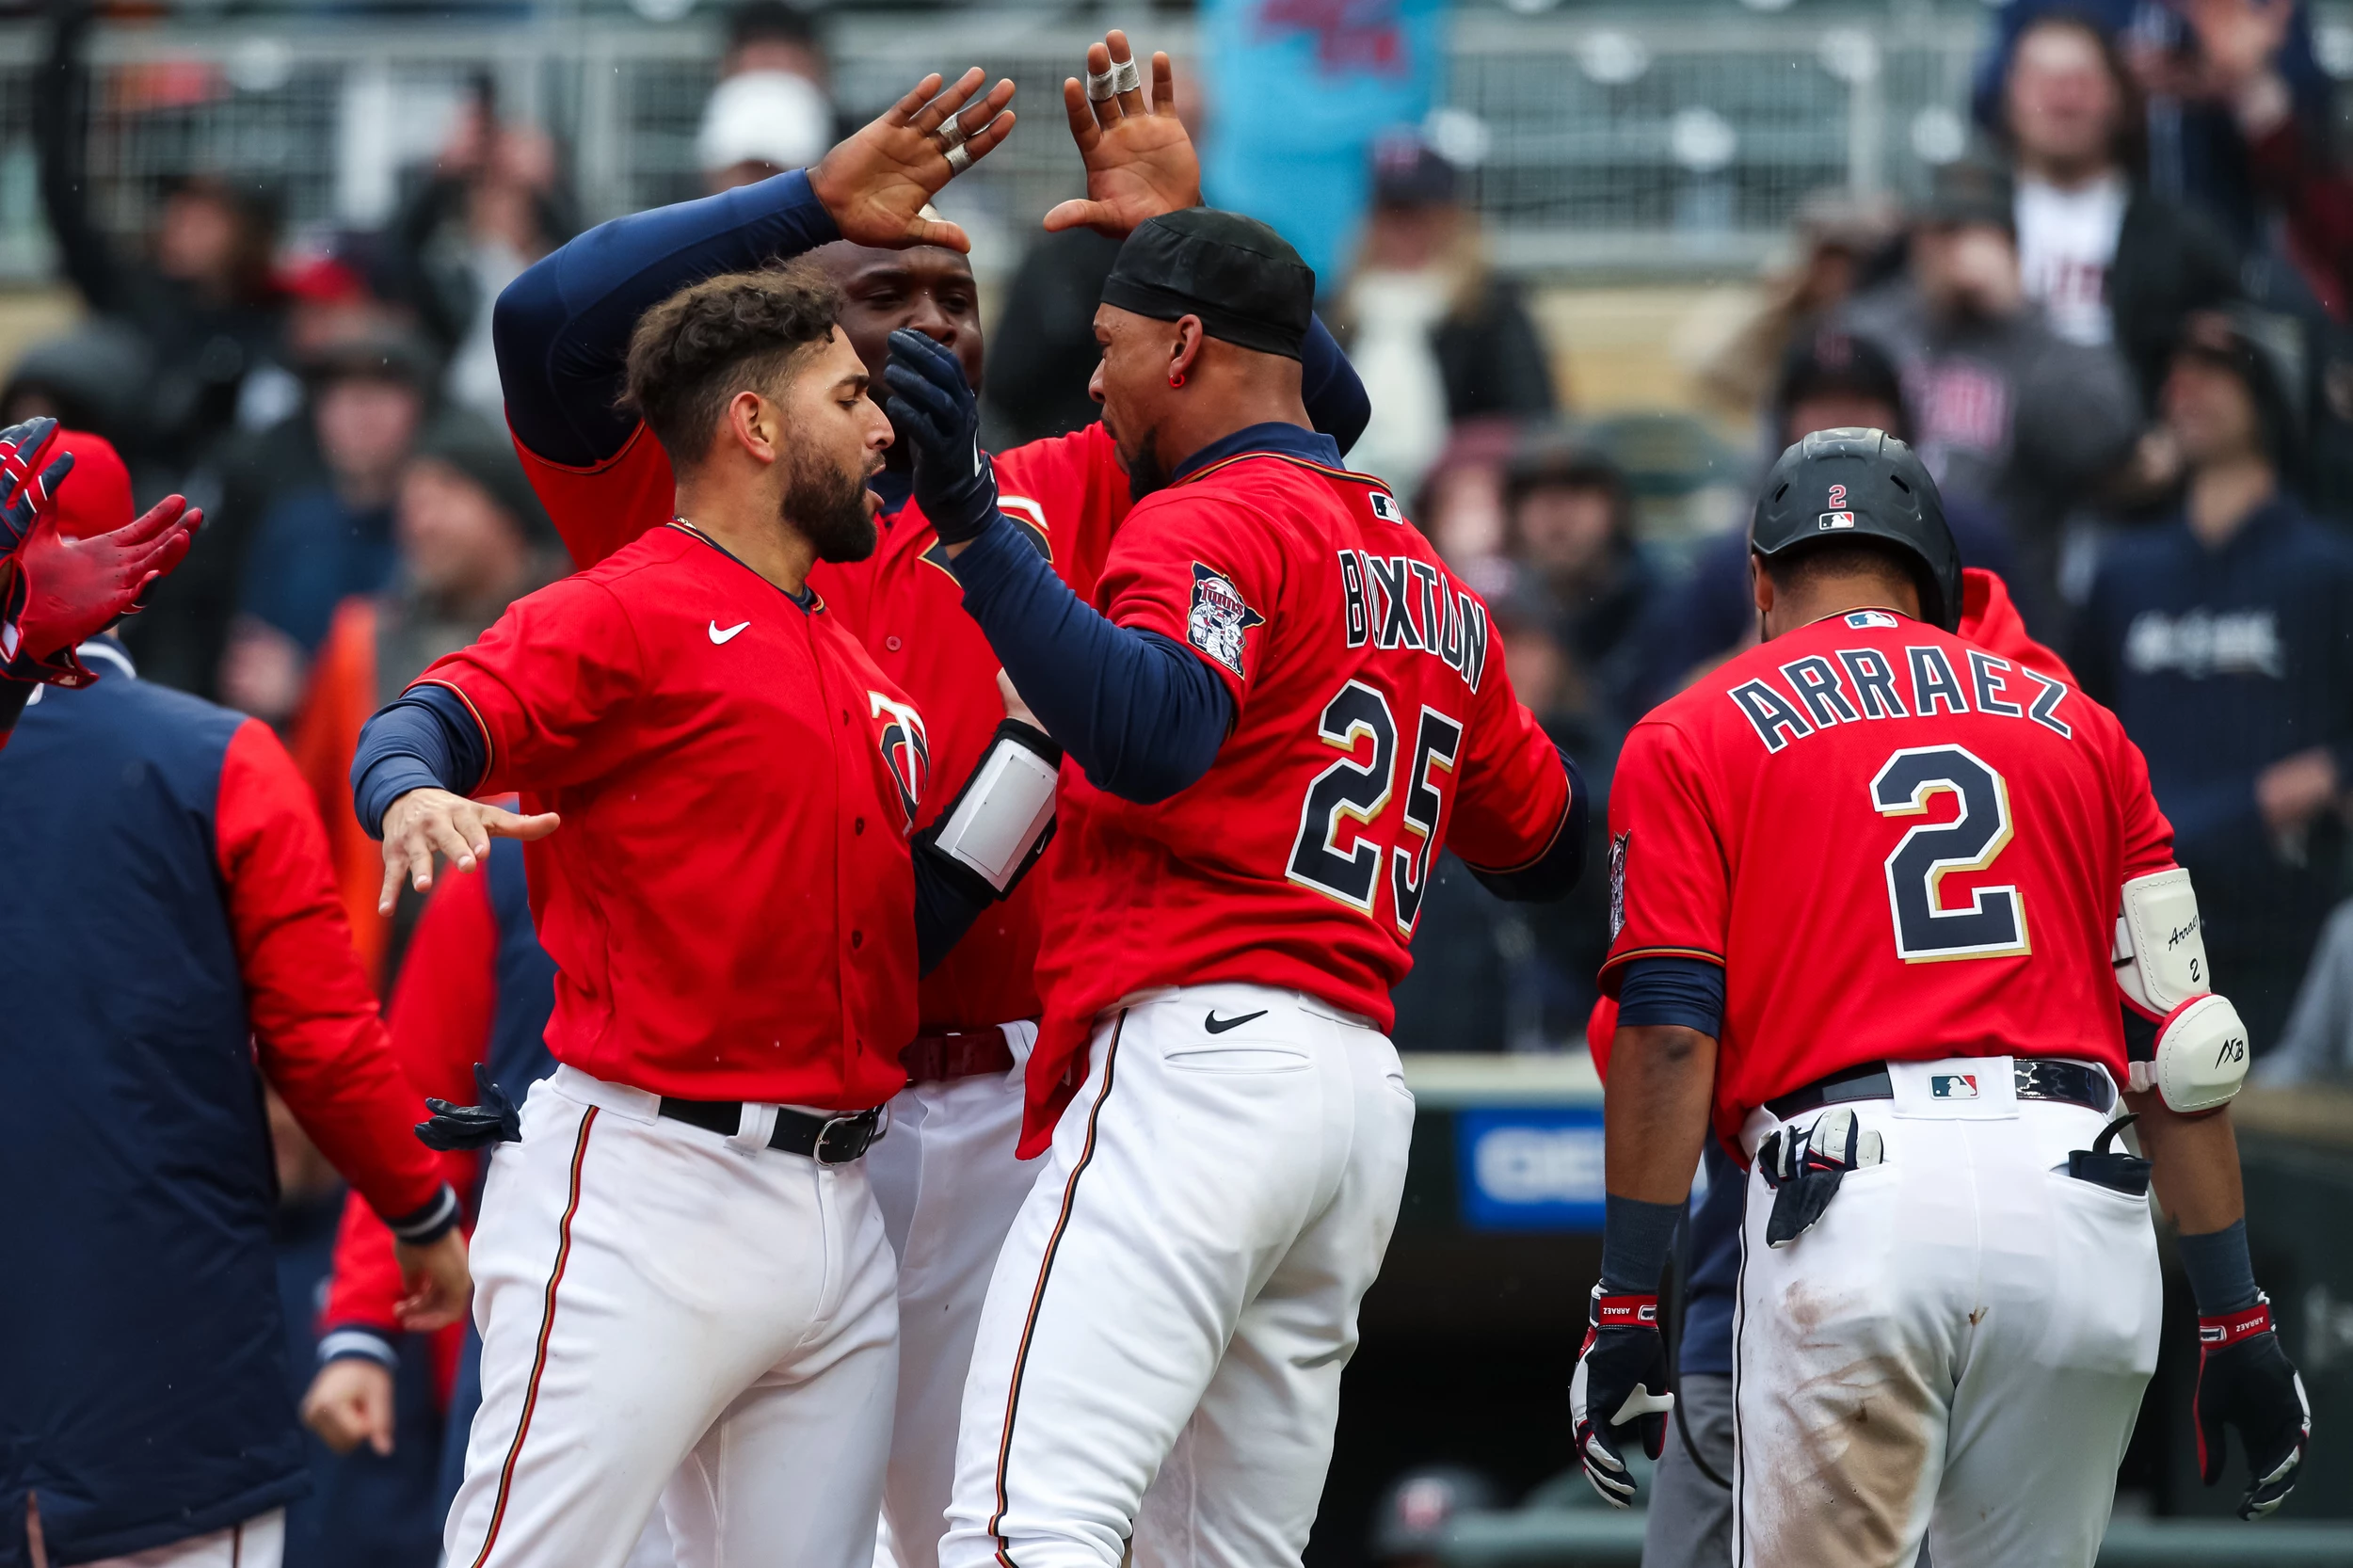 Byron Buxton Powers Minnesota Twins to Victory with 11th Home Run